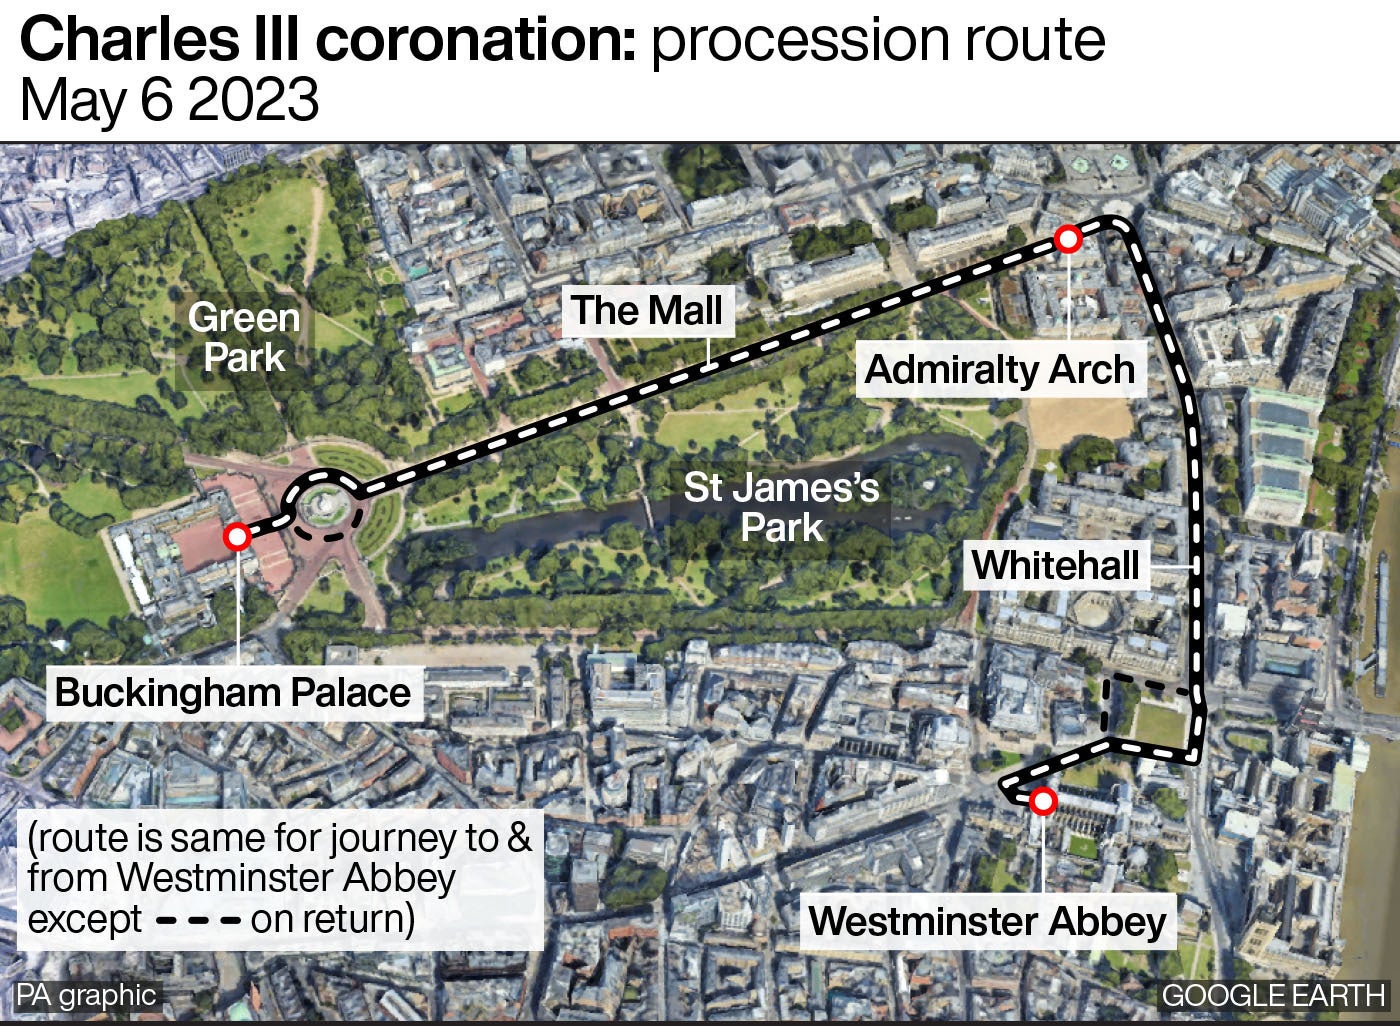 The route King Charles III and Queen Camilla will take in the coronation procession